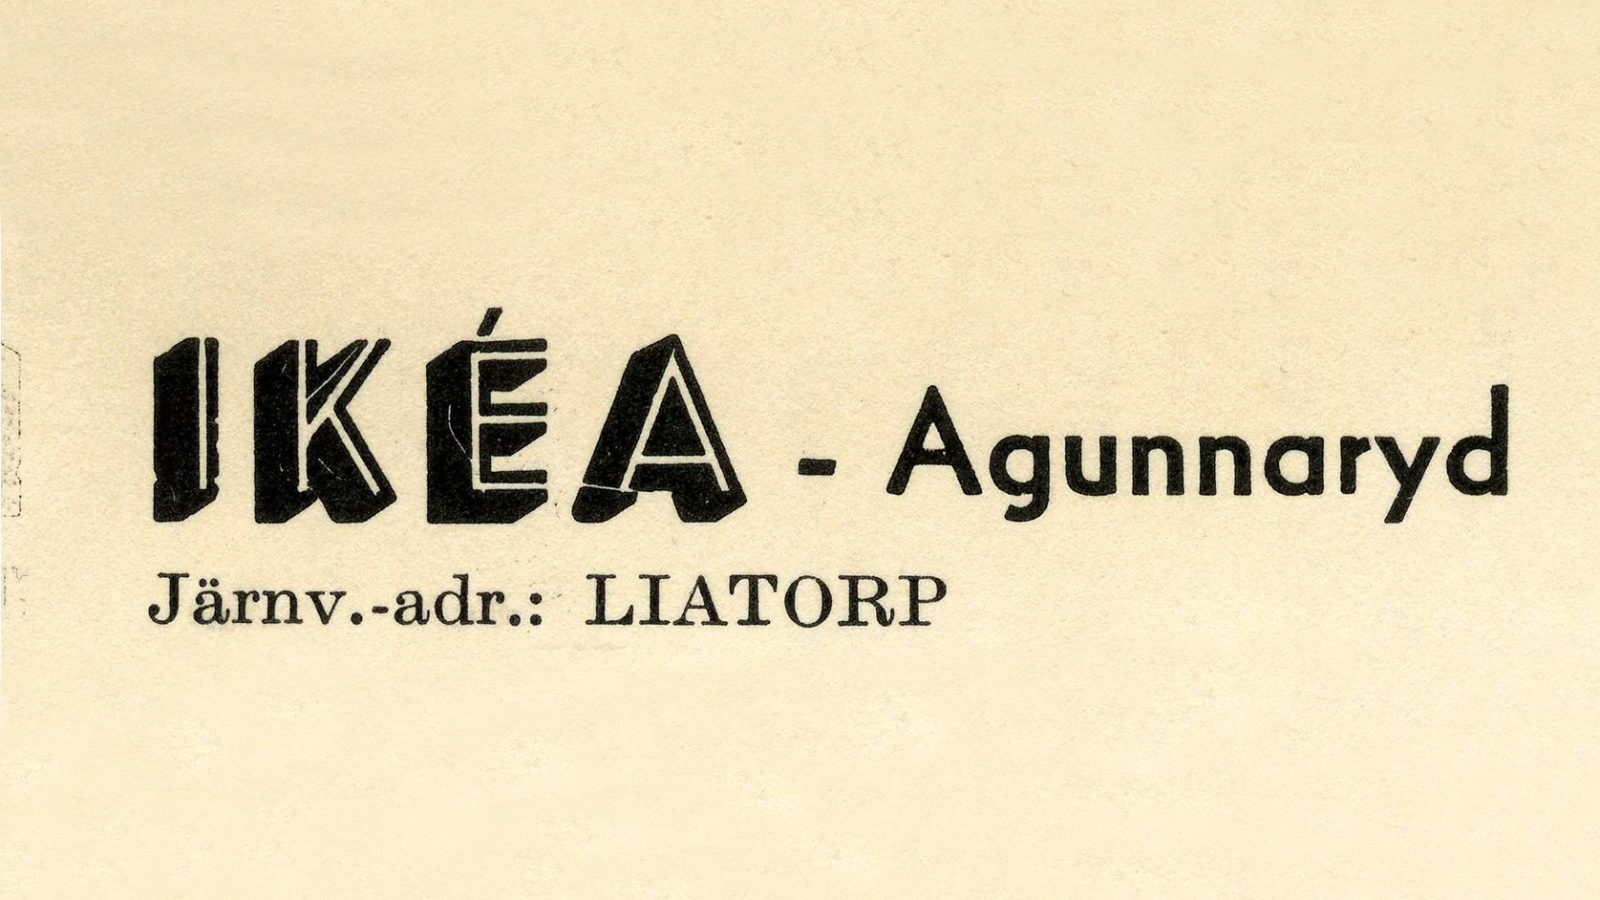 Yellowed paper with text IKÉA, Agunnaryd, in lower case Järnv-adr: LIATORP.